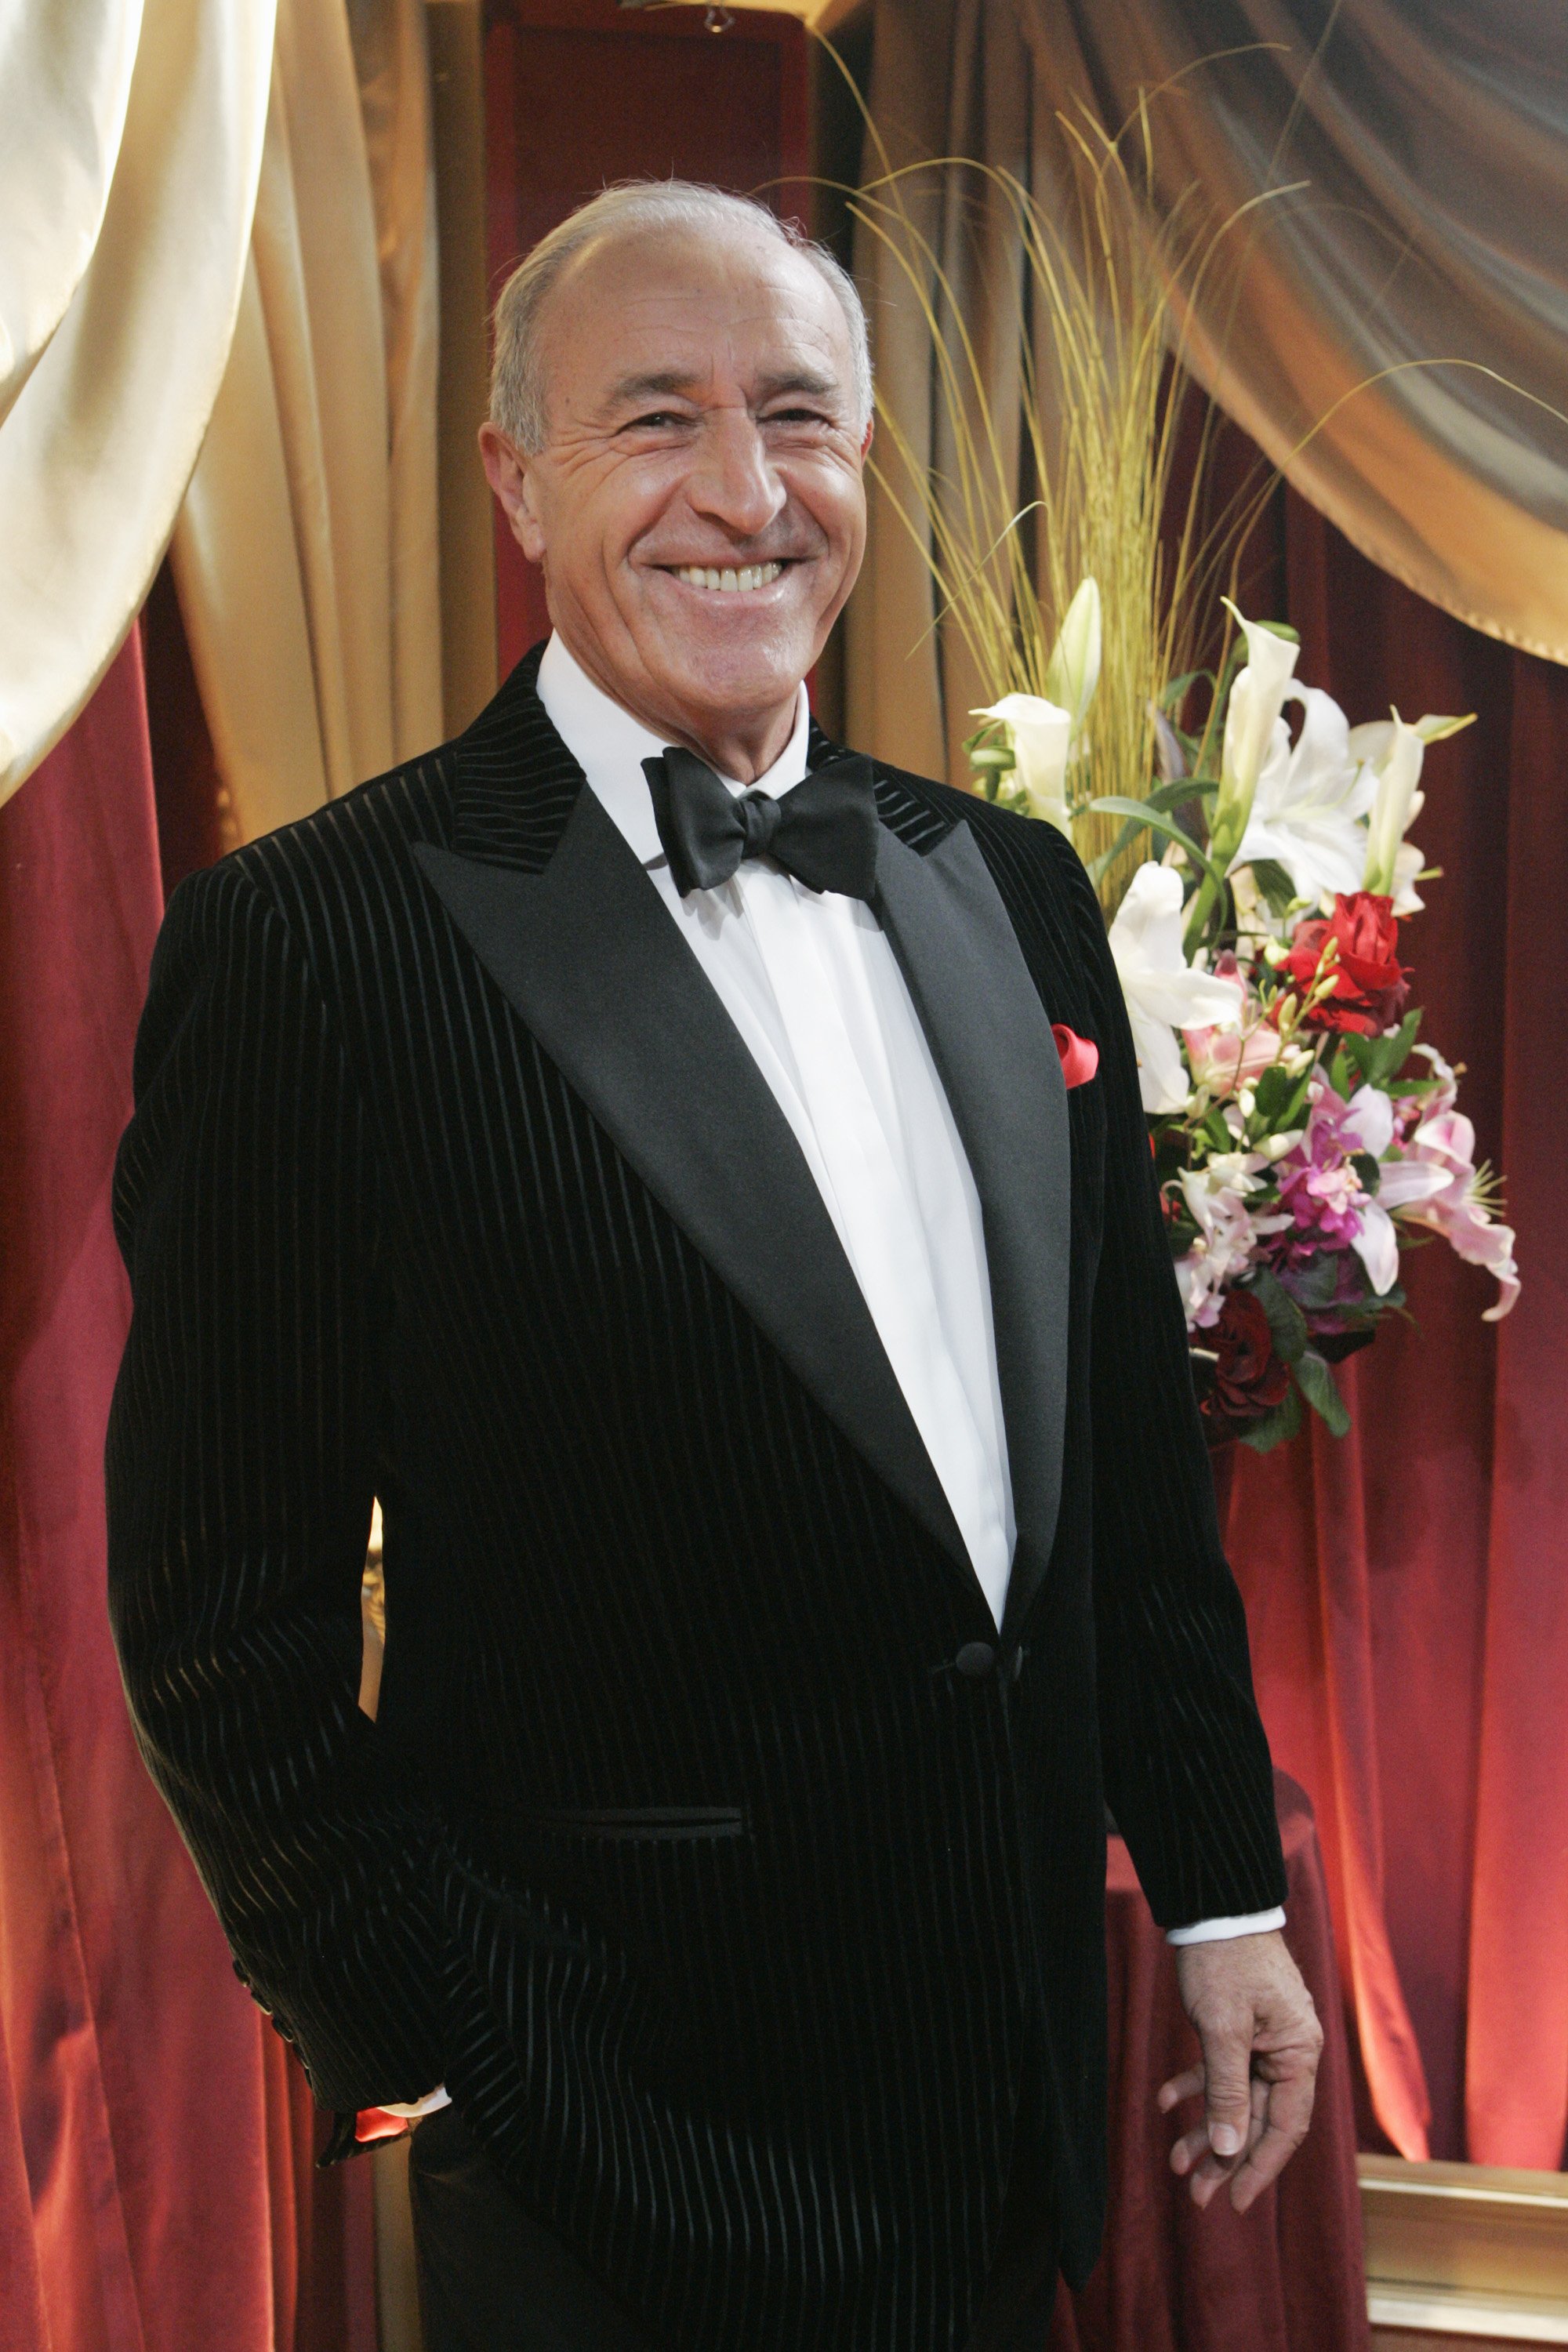 Len Goodman on "Dancing with the Stars" "Episode 710A" on November 25, 2008 | Source: Getty Images 